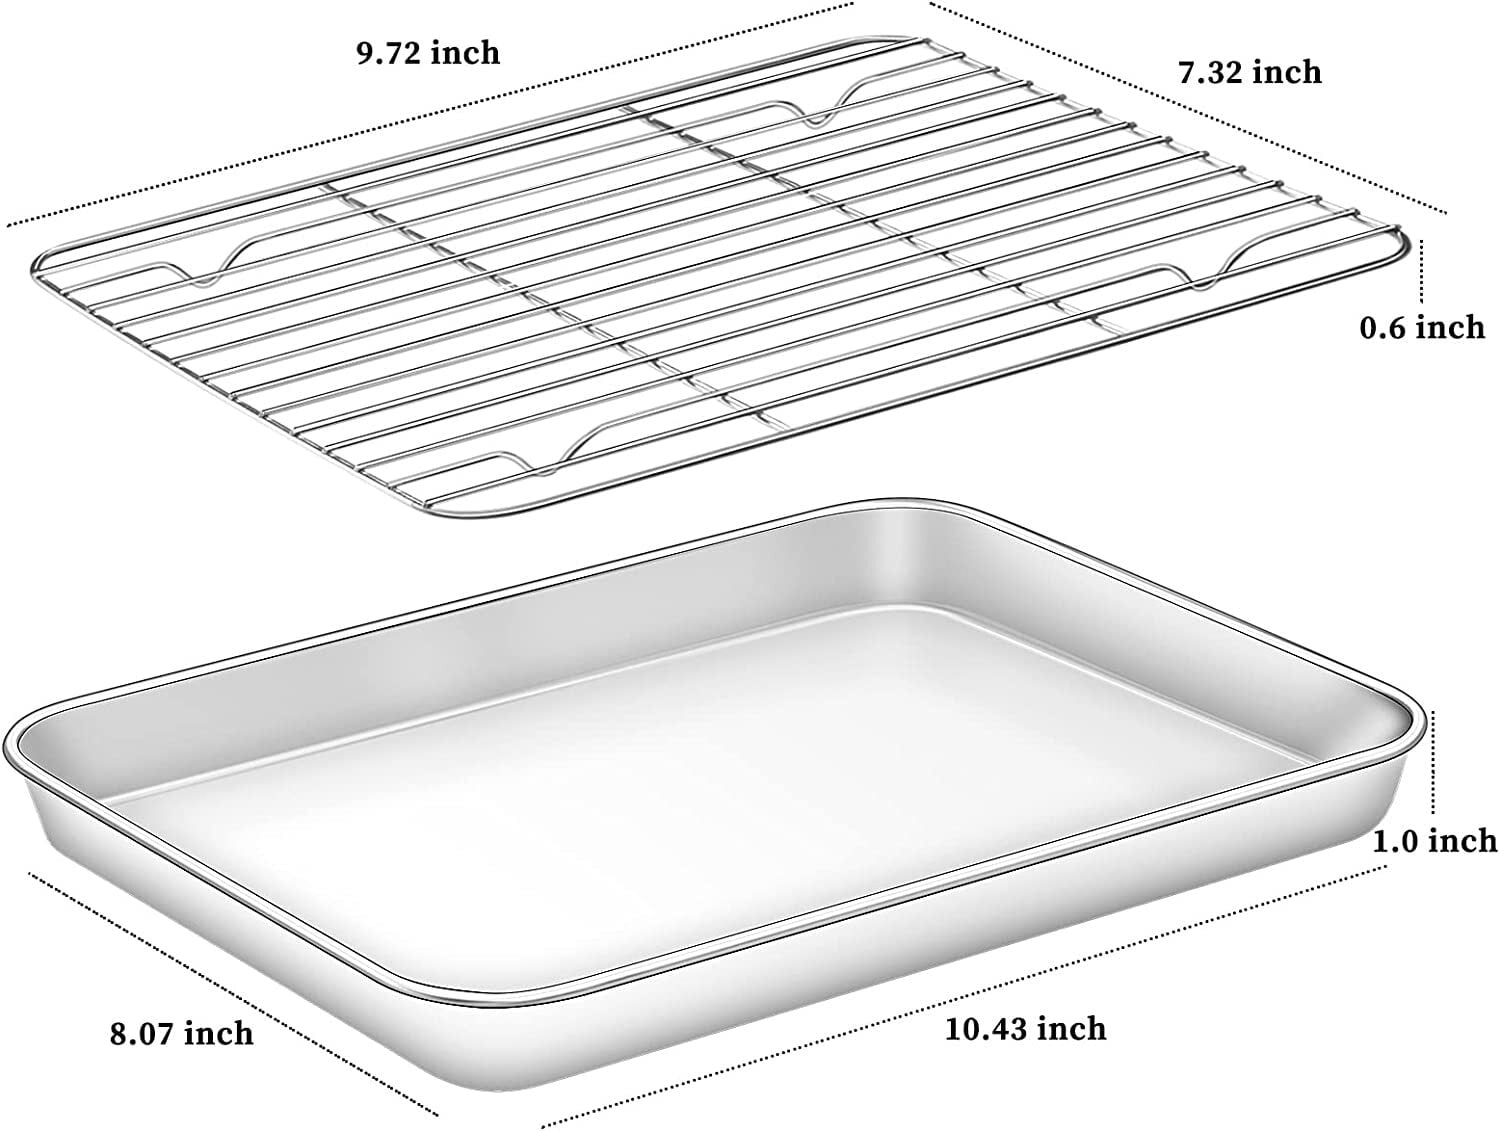 Small Baking Sheet Set of 2, 10.5”x8.3” Stainless Steel Cookies Sheet Pan  for